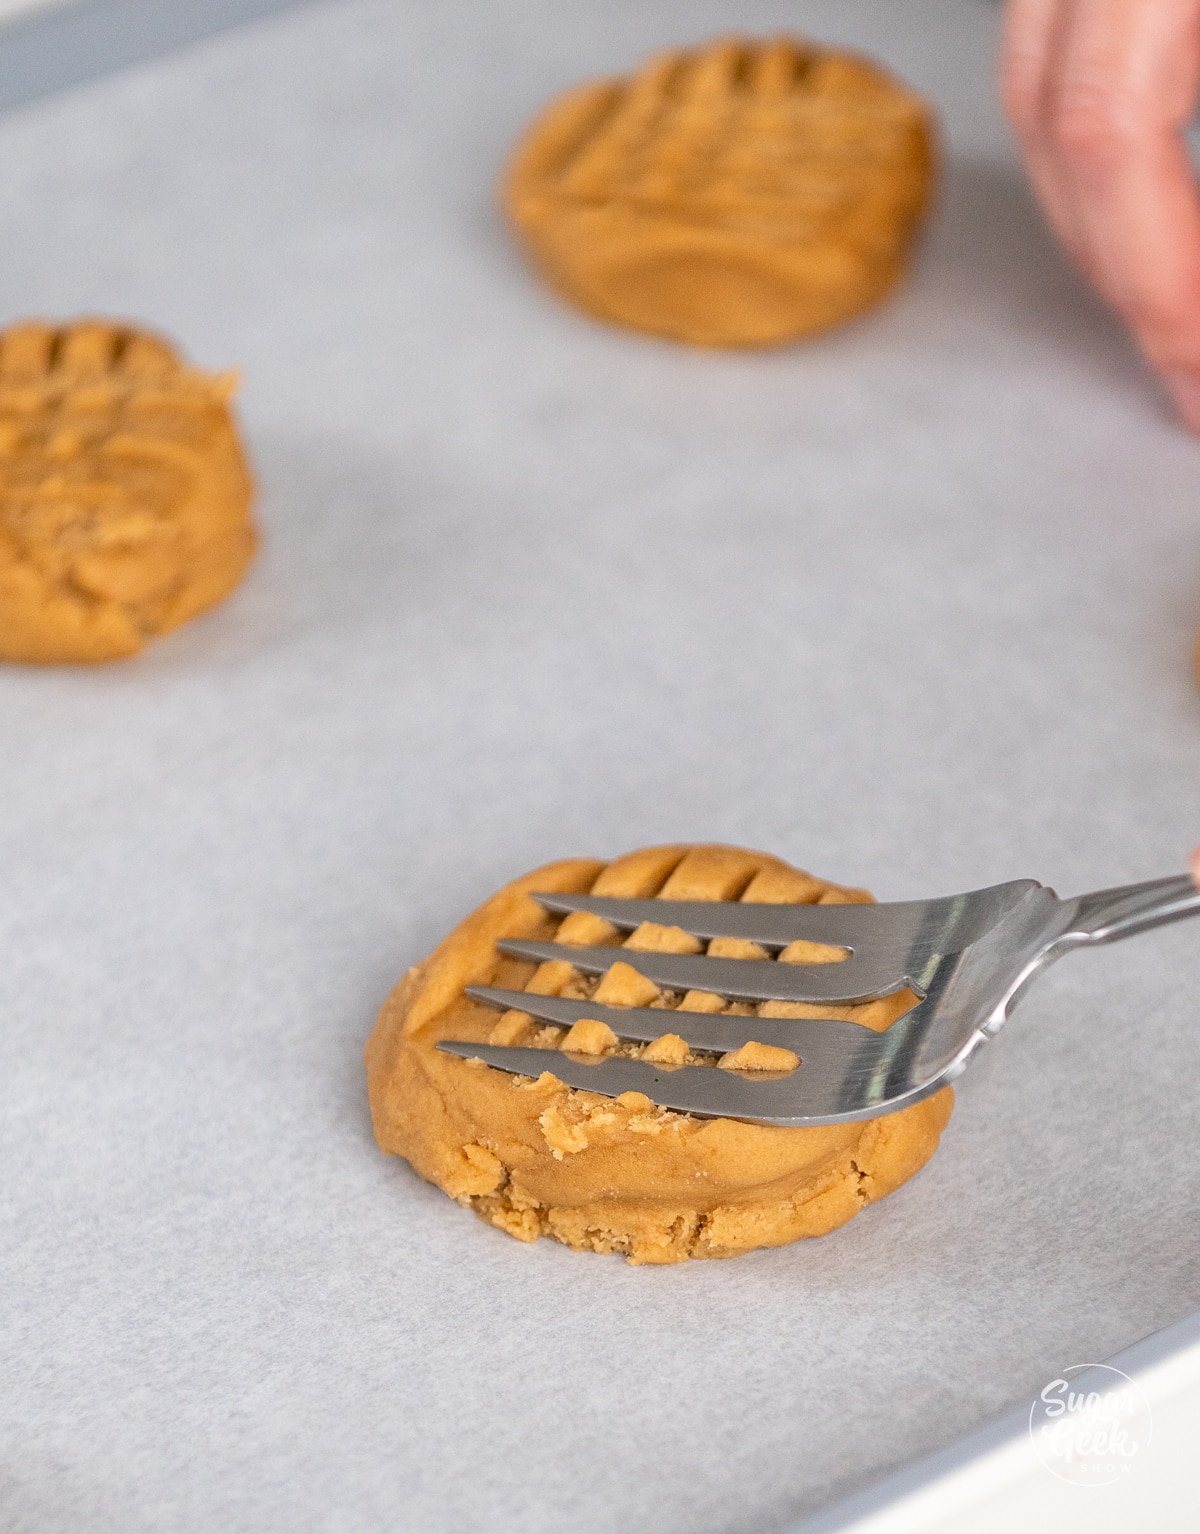 large fork pressing indents into a peanut butter cookie dough ball in the opposite direction